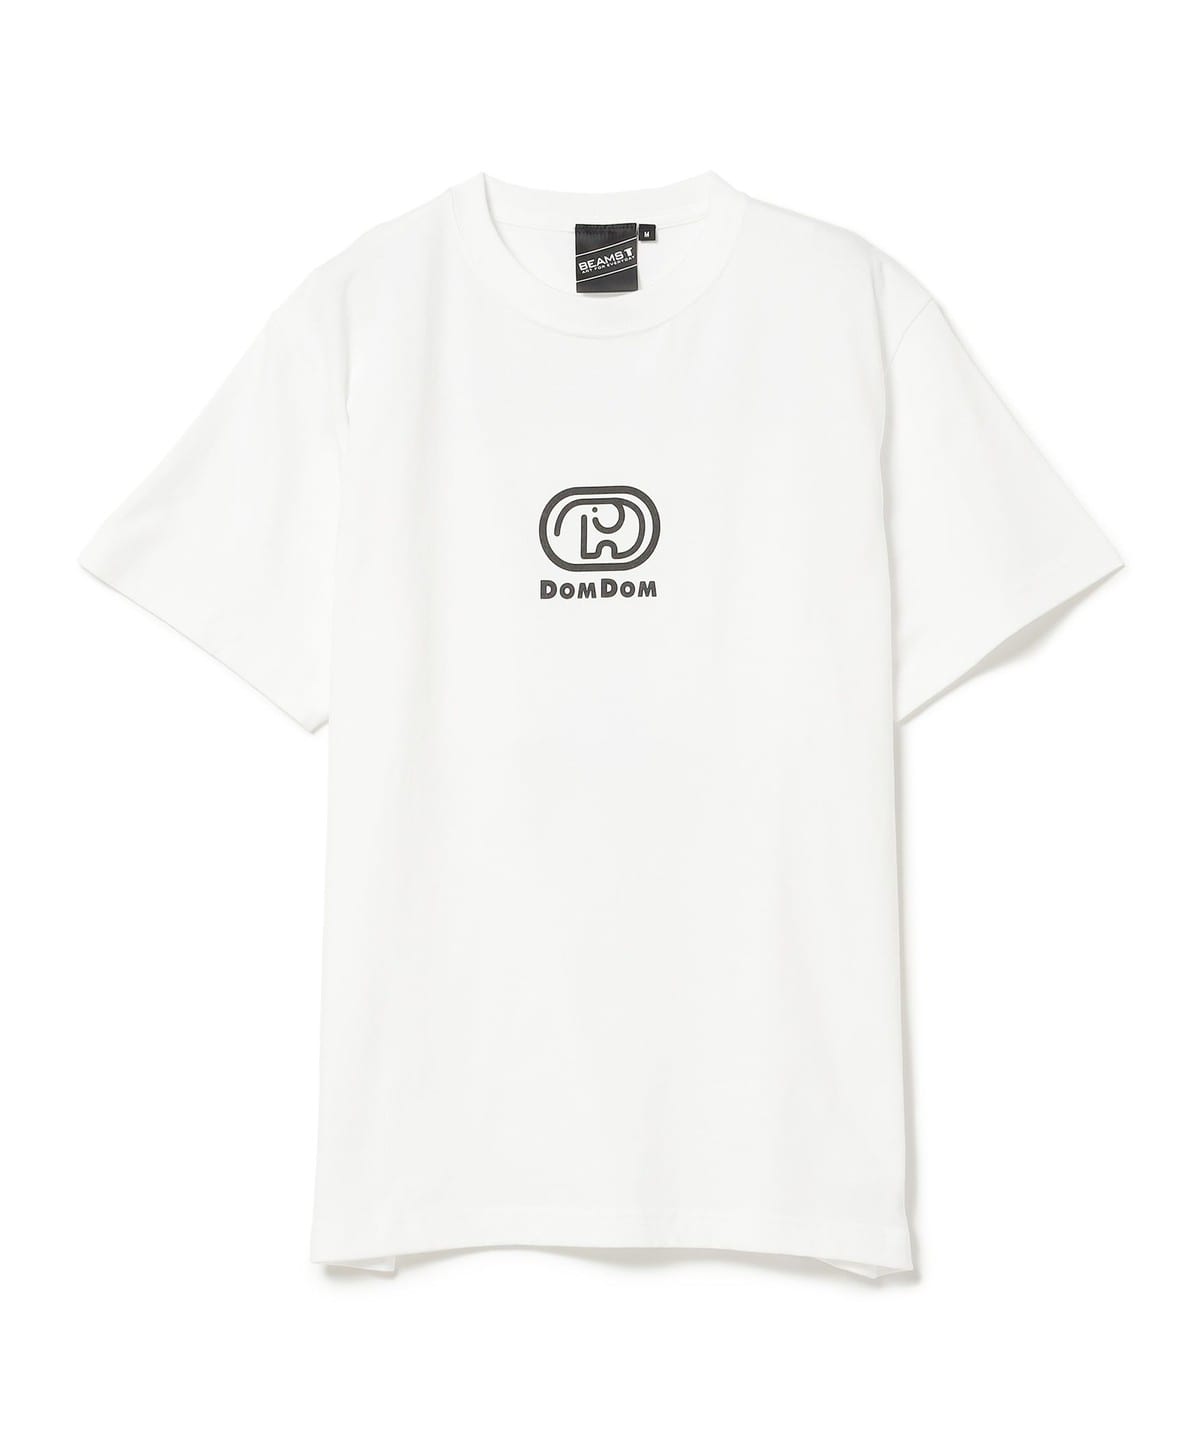 BEAMS T（ビームスT）【SPECIAL PRICE】BEAMS T / DomDom バーガー 厚